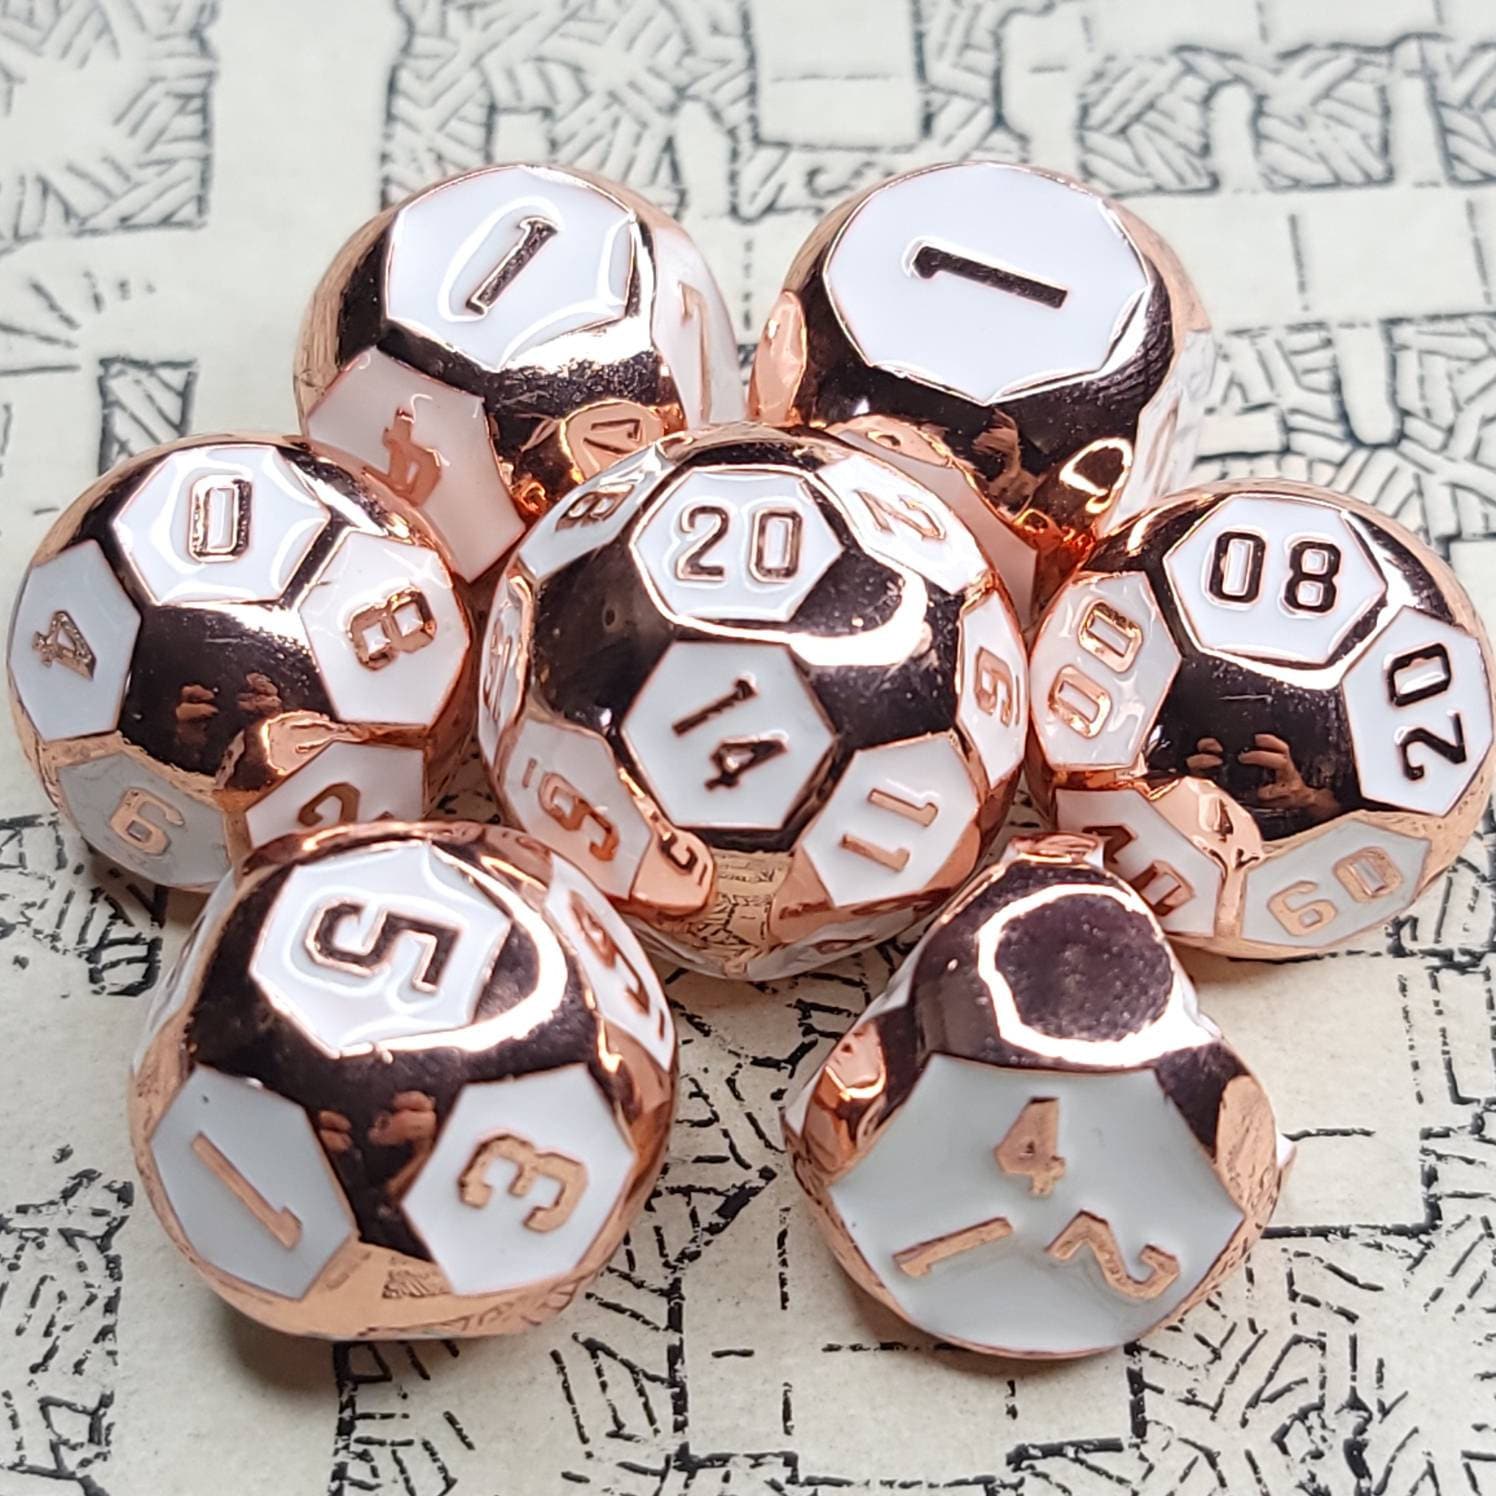 Orbs of Righteousness Metal Dice Set| RPG Dice | Polyhedral Dice Set | Dungeons & Dragons | DnD Dice Set | Metal Dice Set